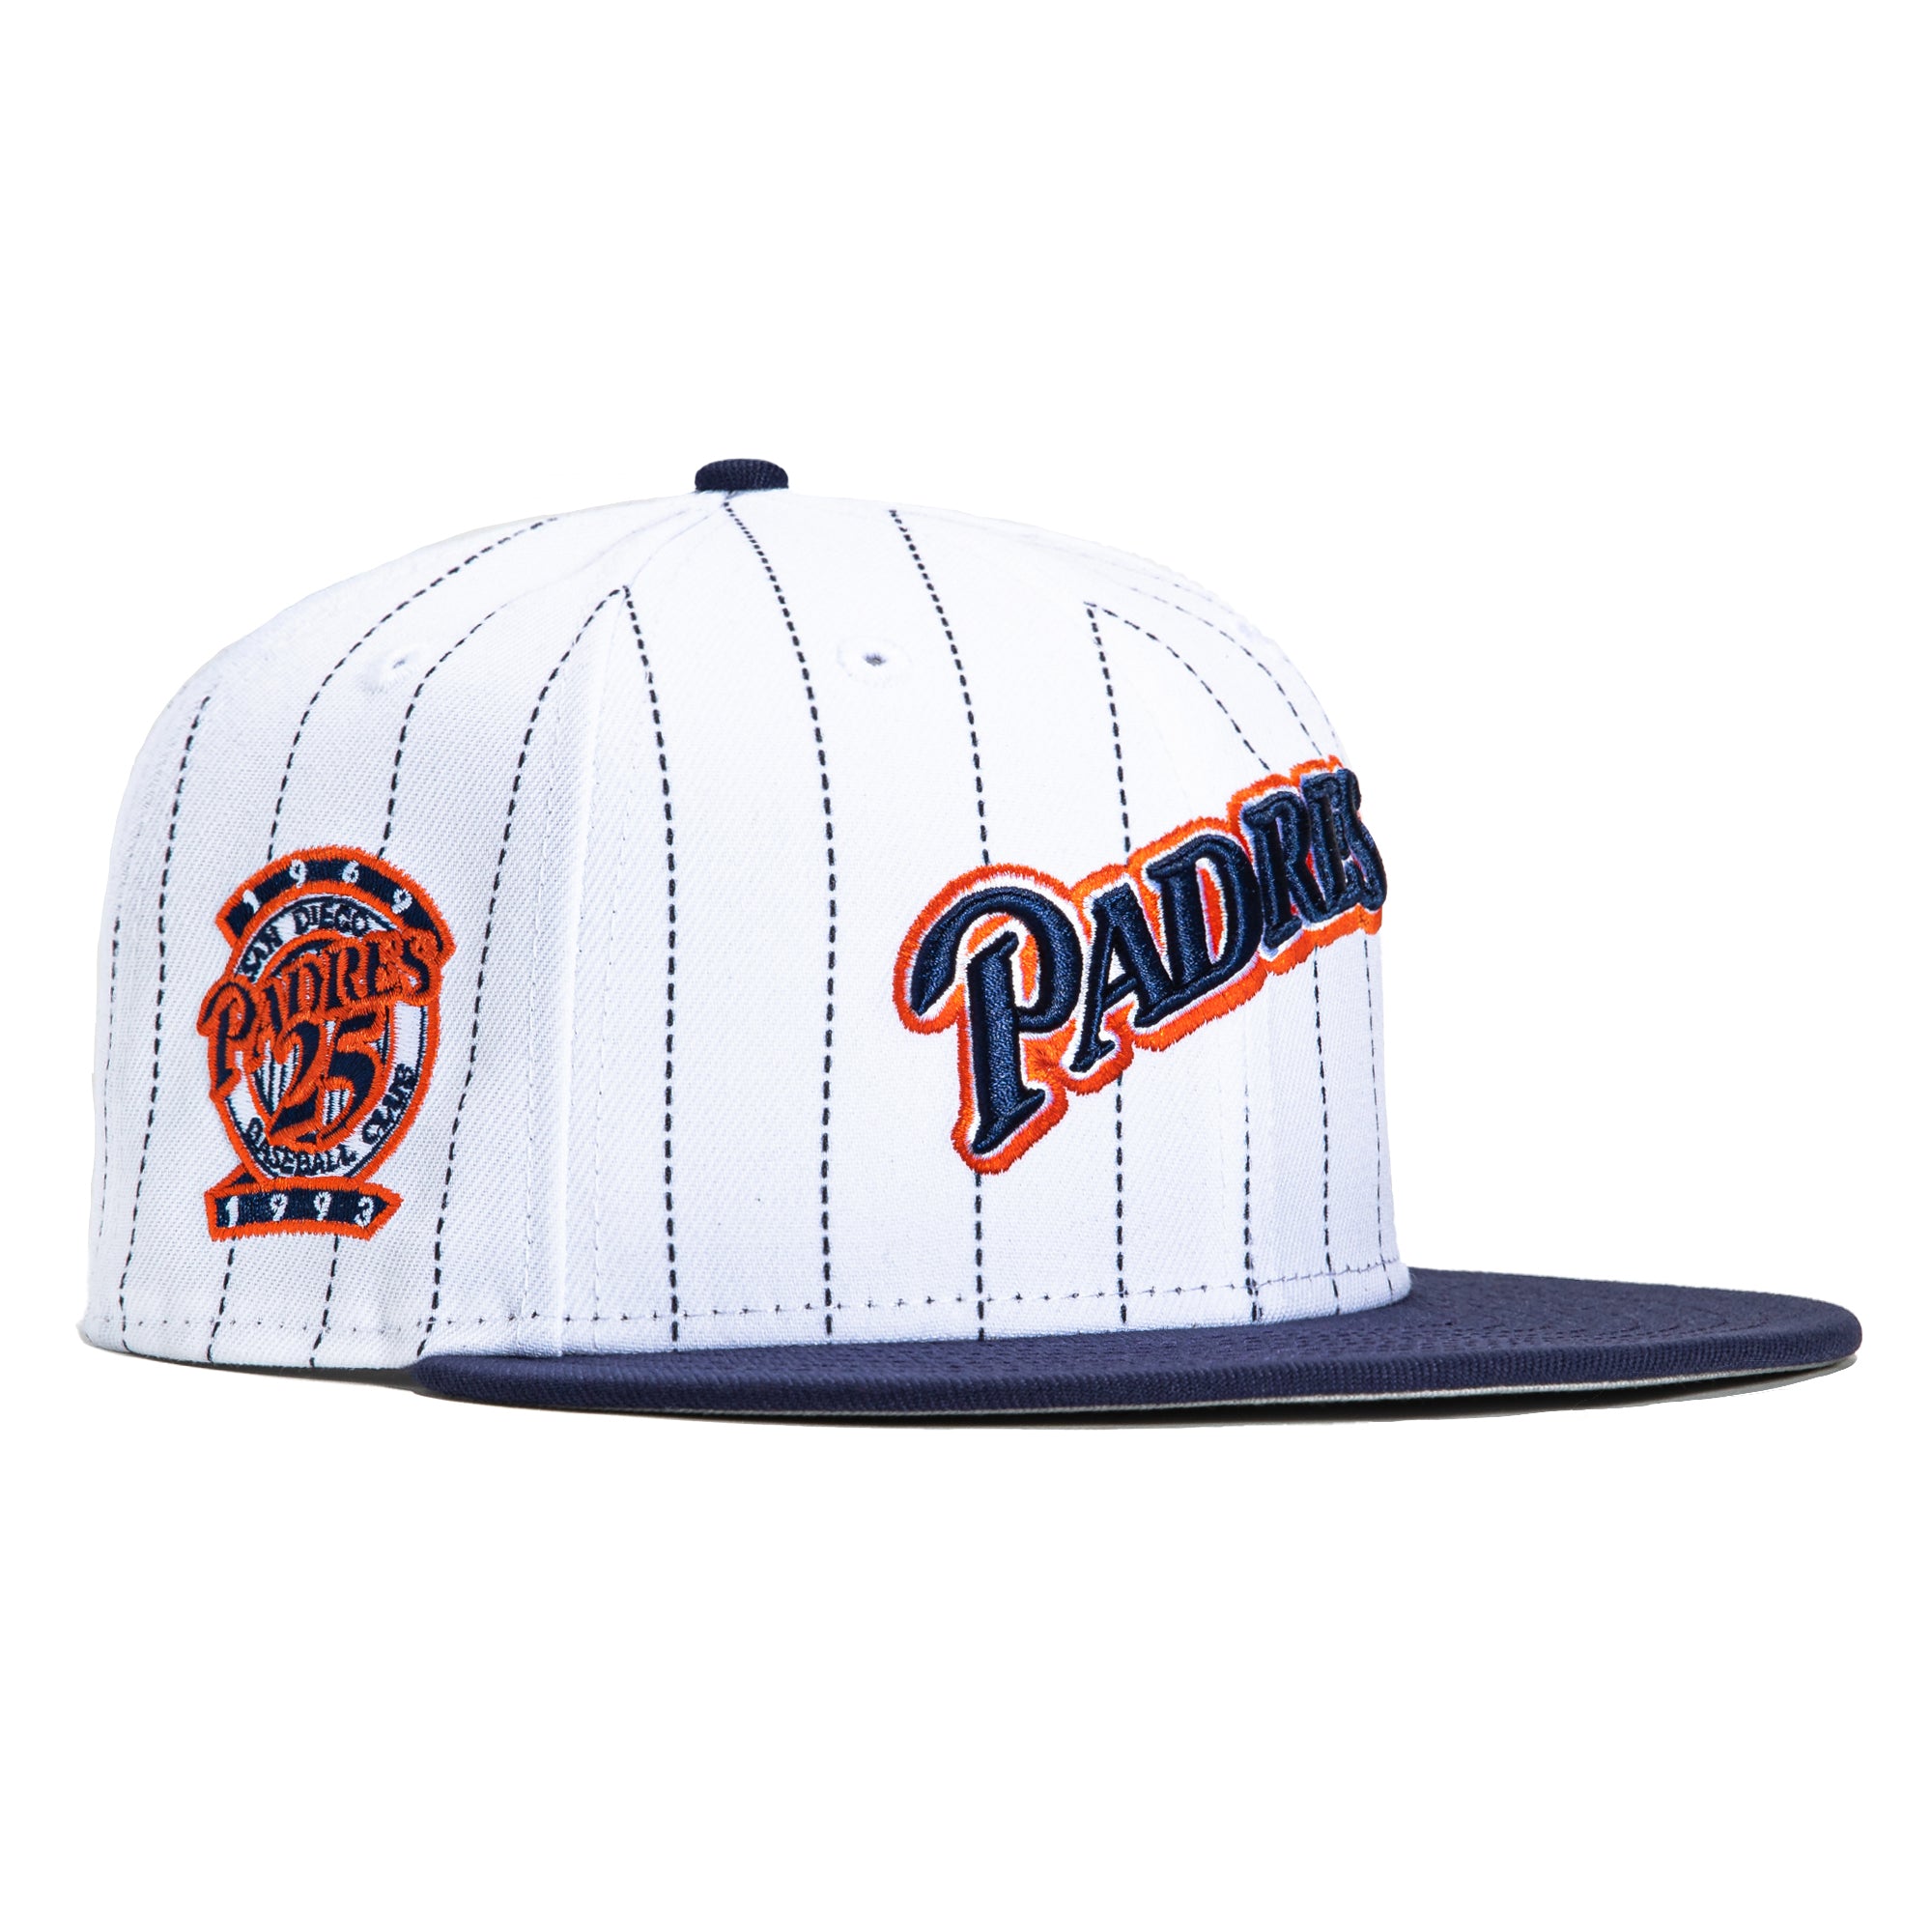 San Diego Padres New Era City Connect 9FIFTY Adjustable Snapback Cap